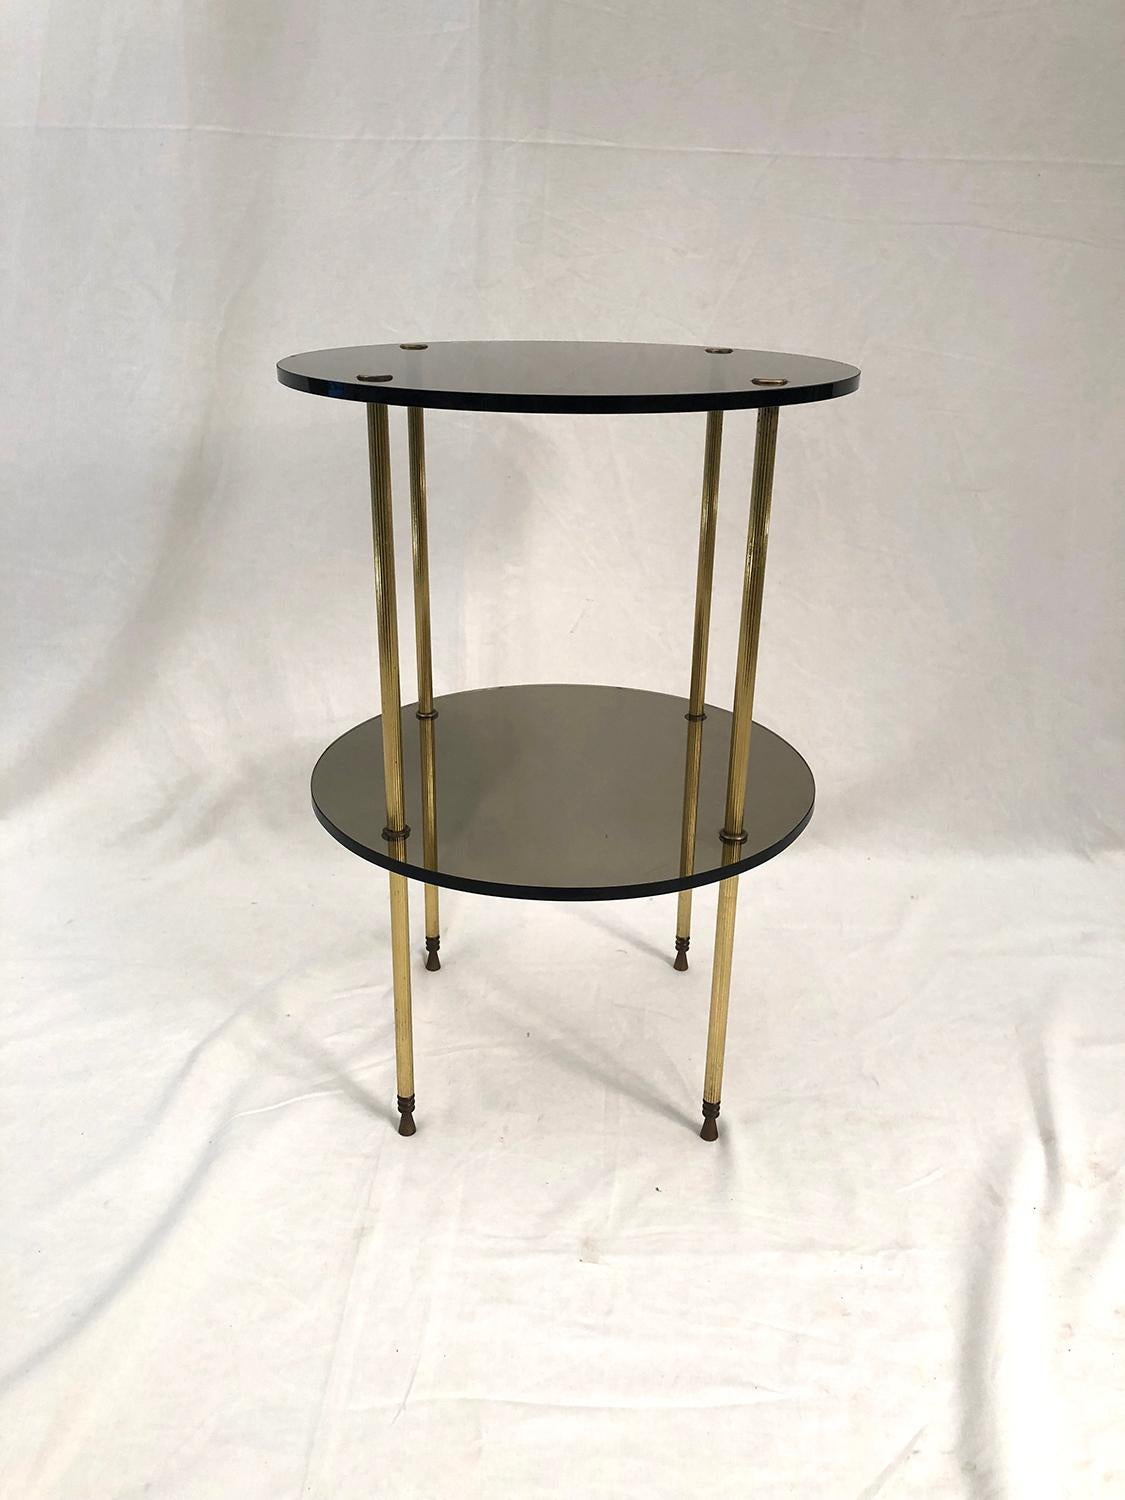 Smoked glass and brass side table.

Table d'appoint en verre fumé et laiton.